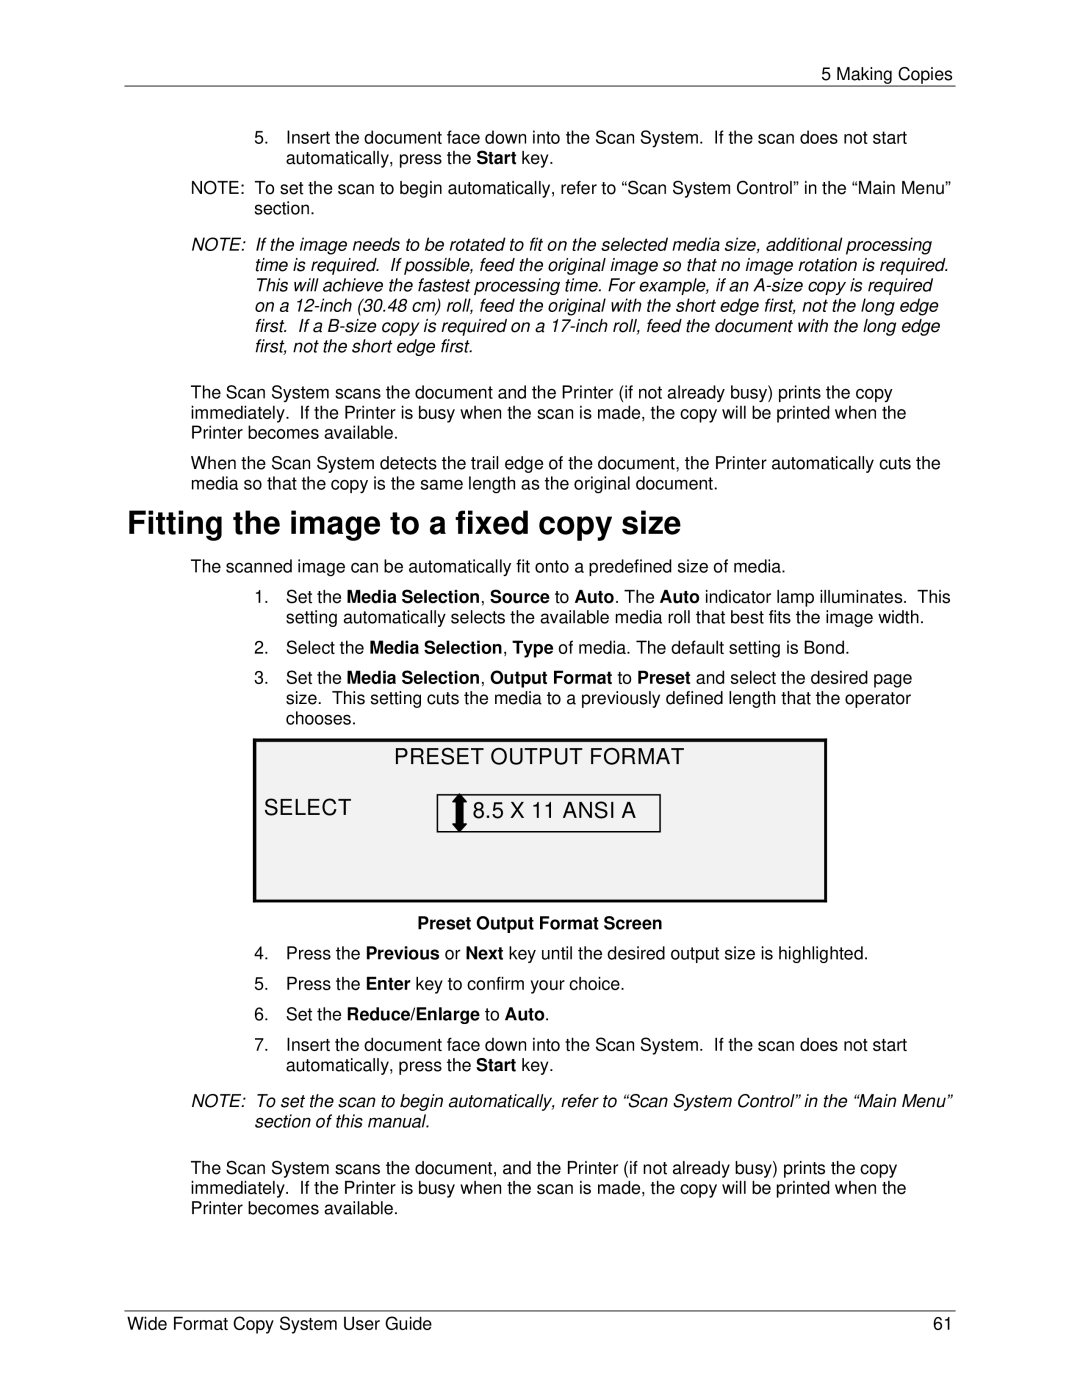 Xerox 5101, 6279 manual Fitting the image to a fixed copy size, Set the Reduce/Enlarge to Auto 